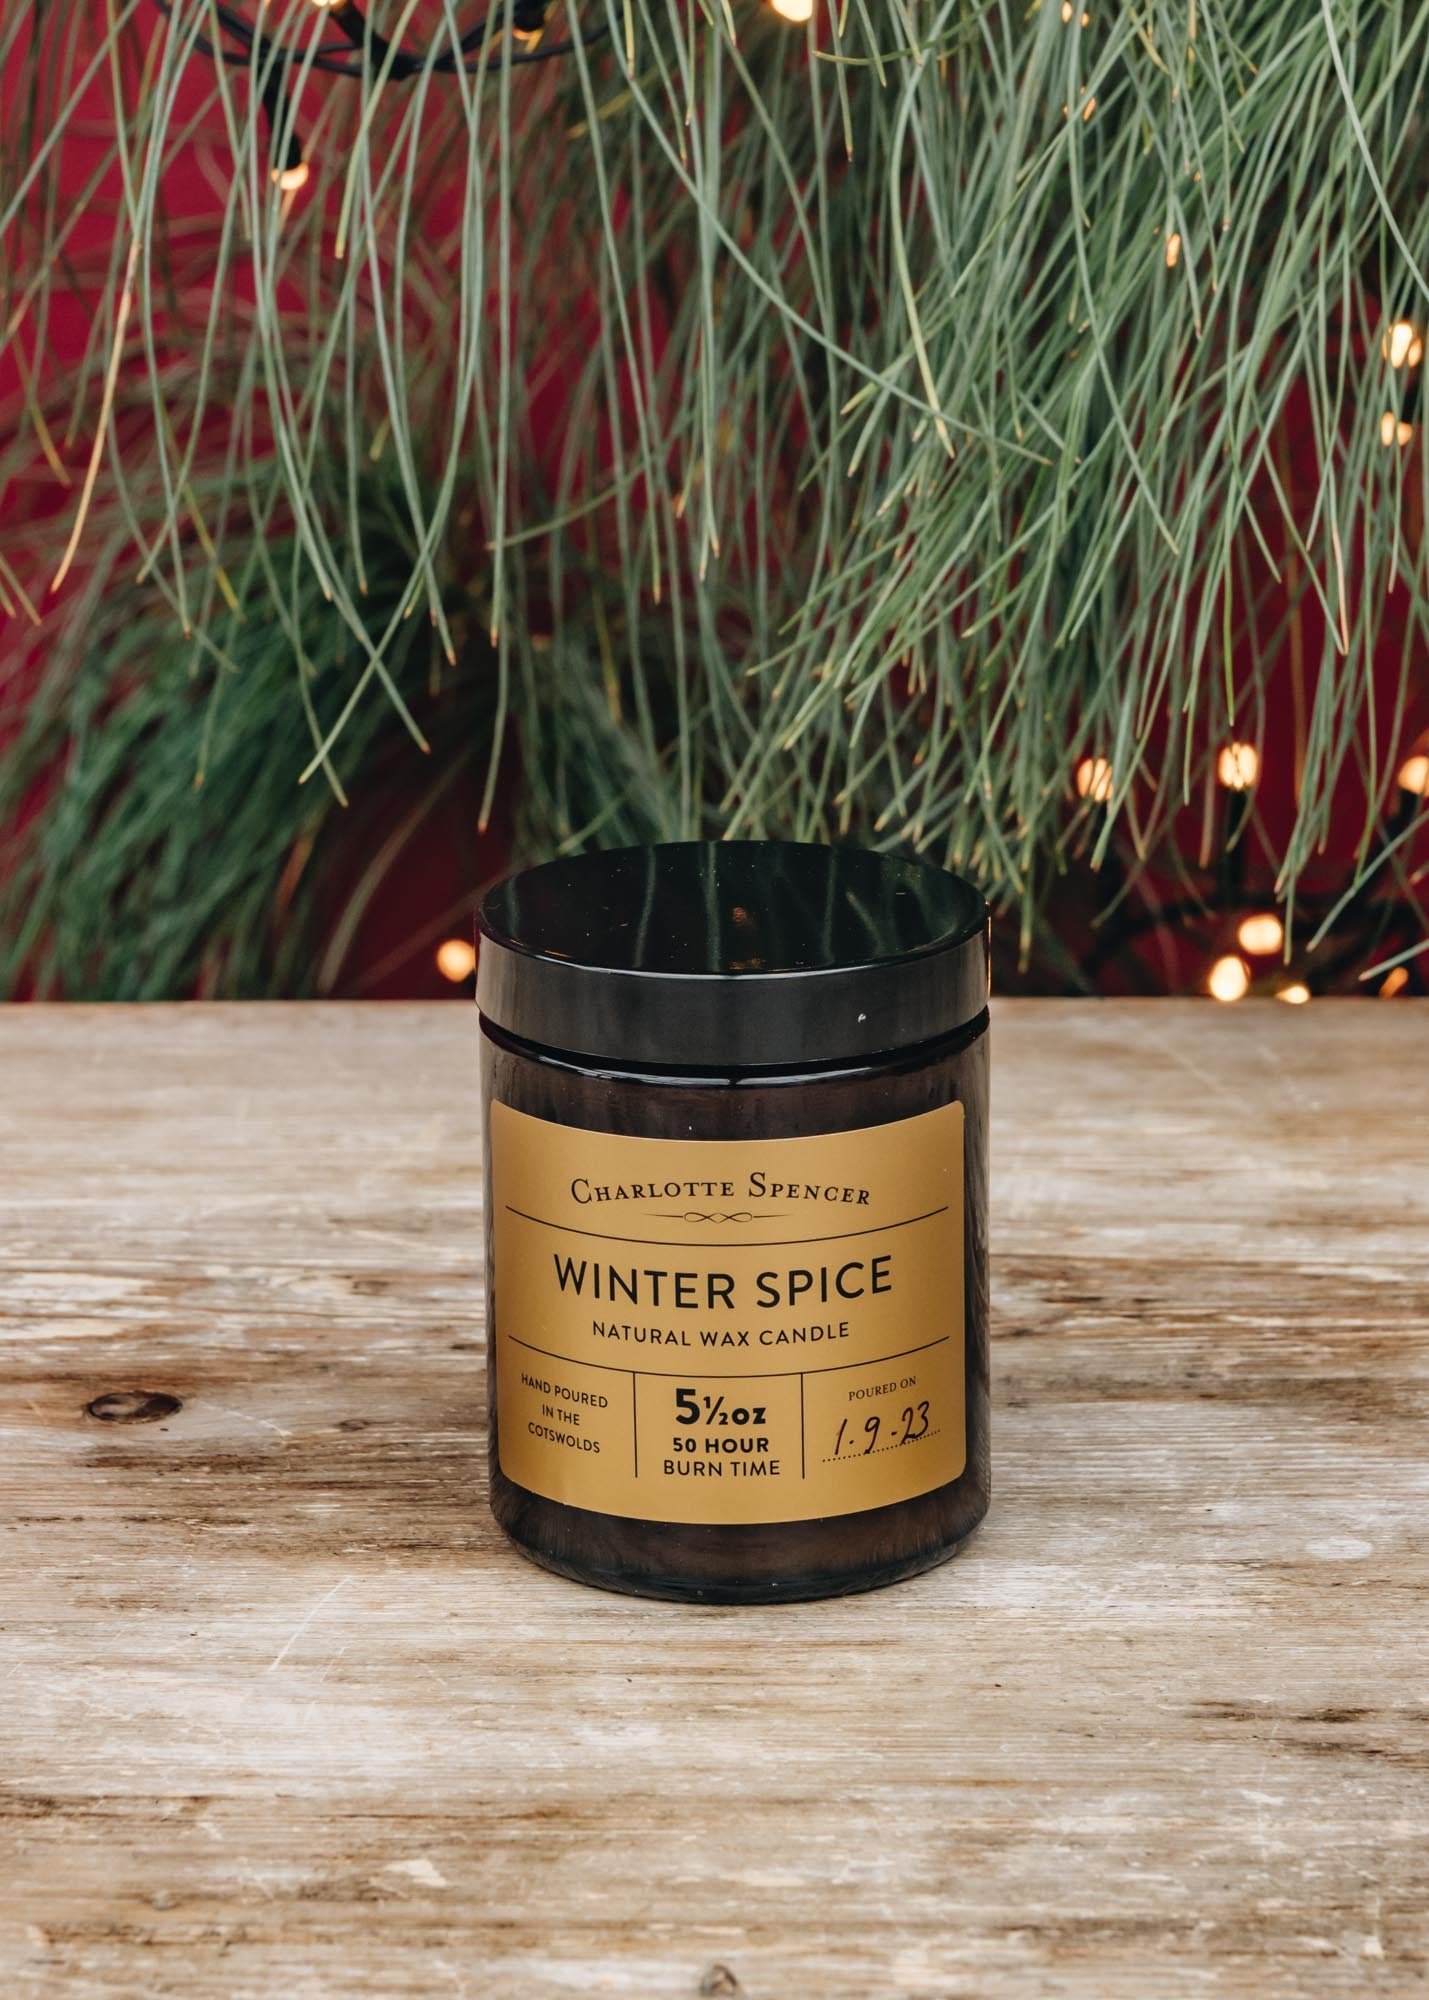 Charlotte Spencer Scented Candle in Winter Spice, 5.5oz